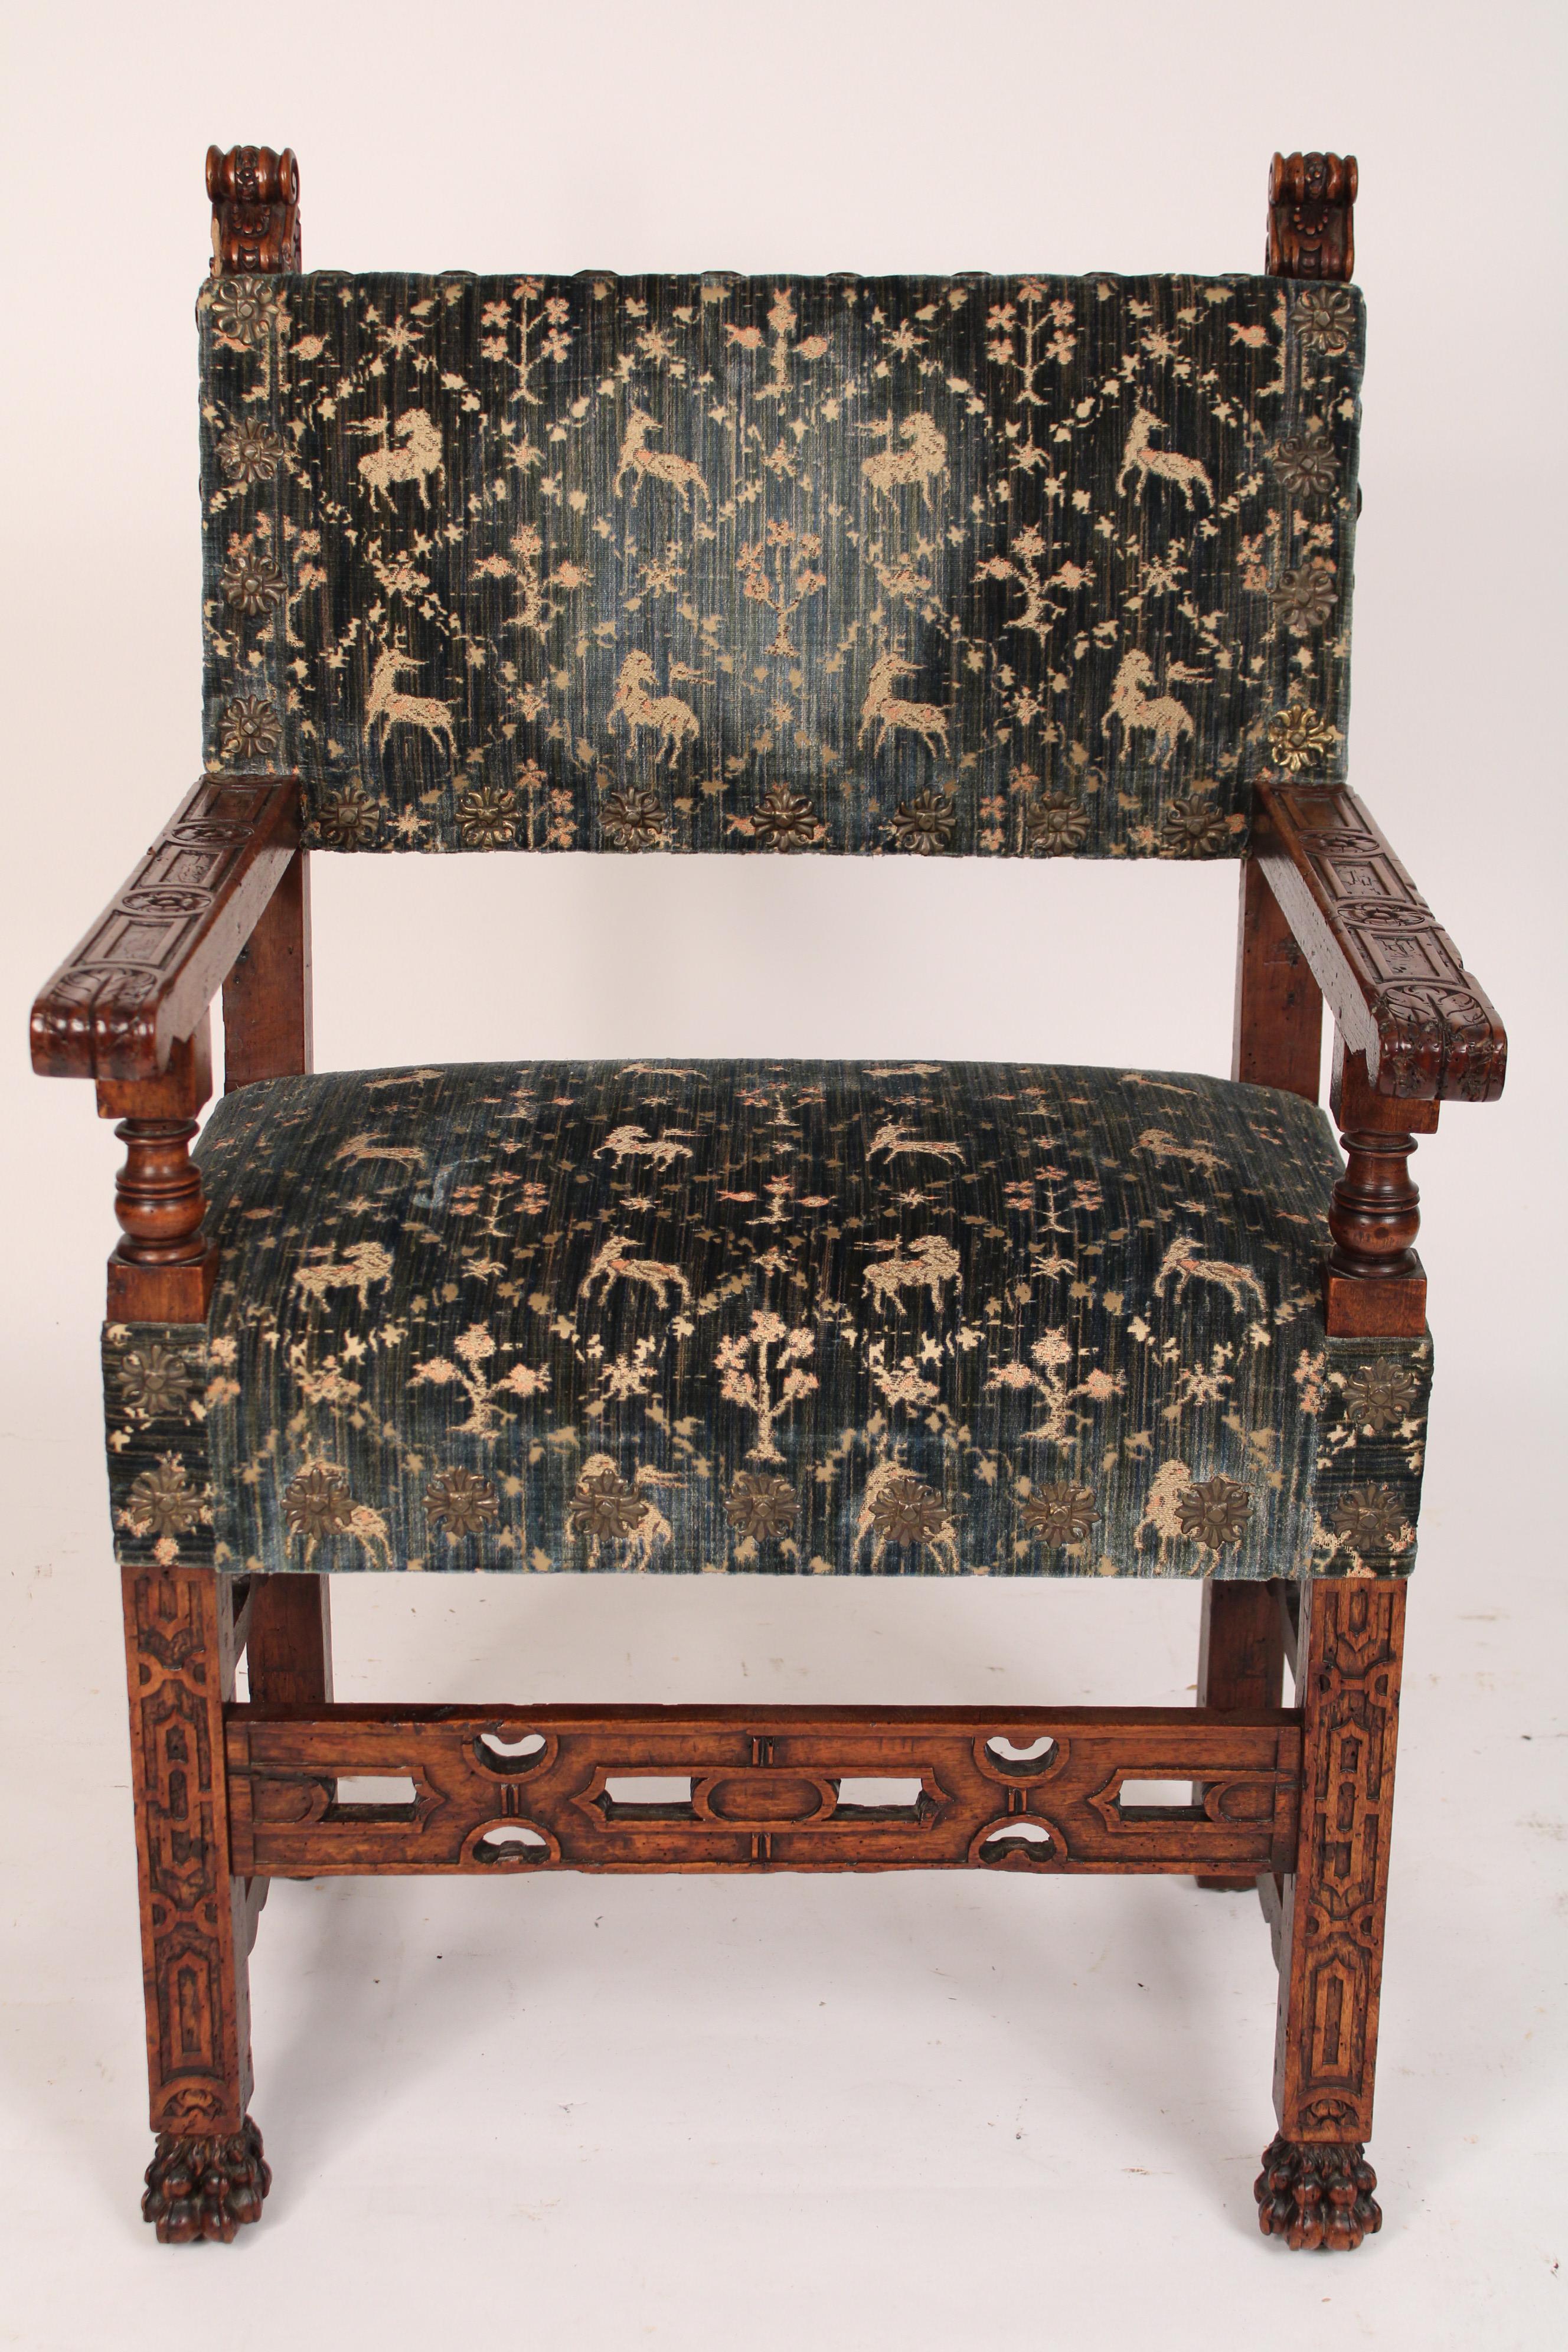 Antique Spanish carved walnut armchair with old cut velvet fabric, 19th century. Nicely carved chair frame, old walnut has excellent patina, old worm holes, interesting cut velvet fabric with animals and brass nail heads. Peg construction.